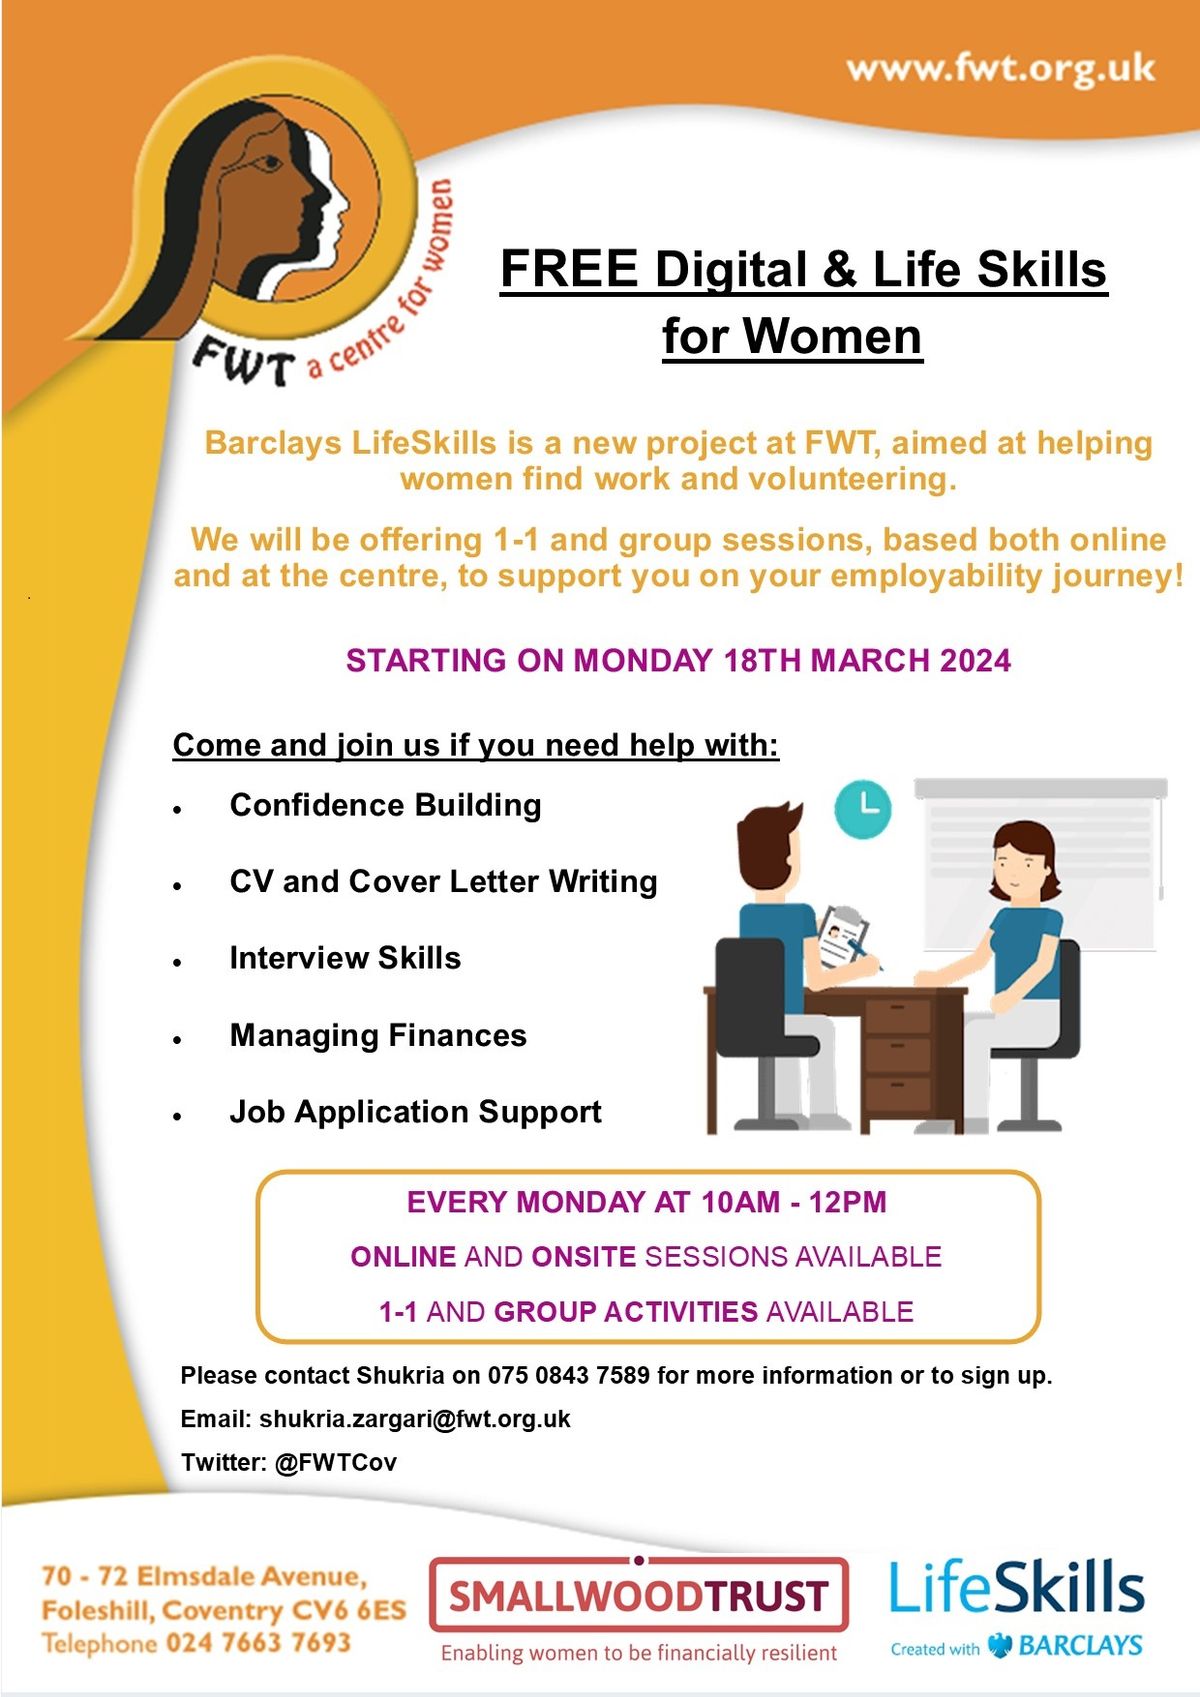 FREE Digital and Lifeskills for women at FWT (Monday's 10-12)